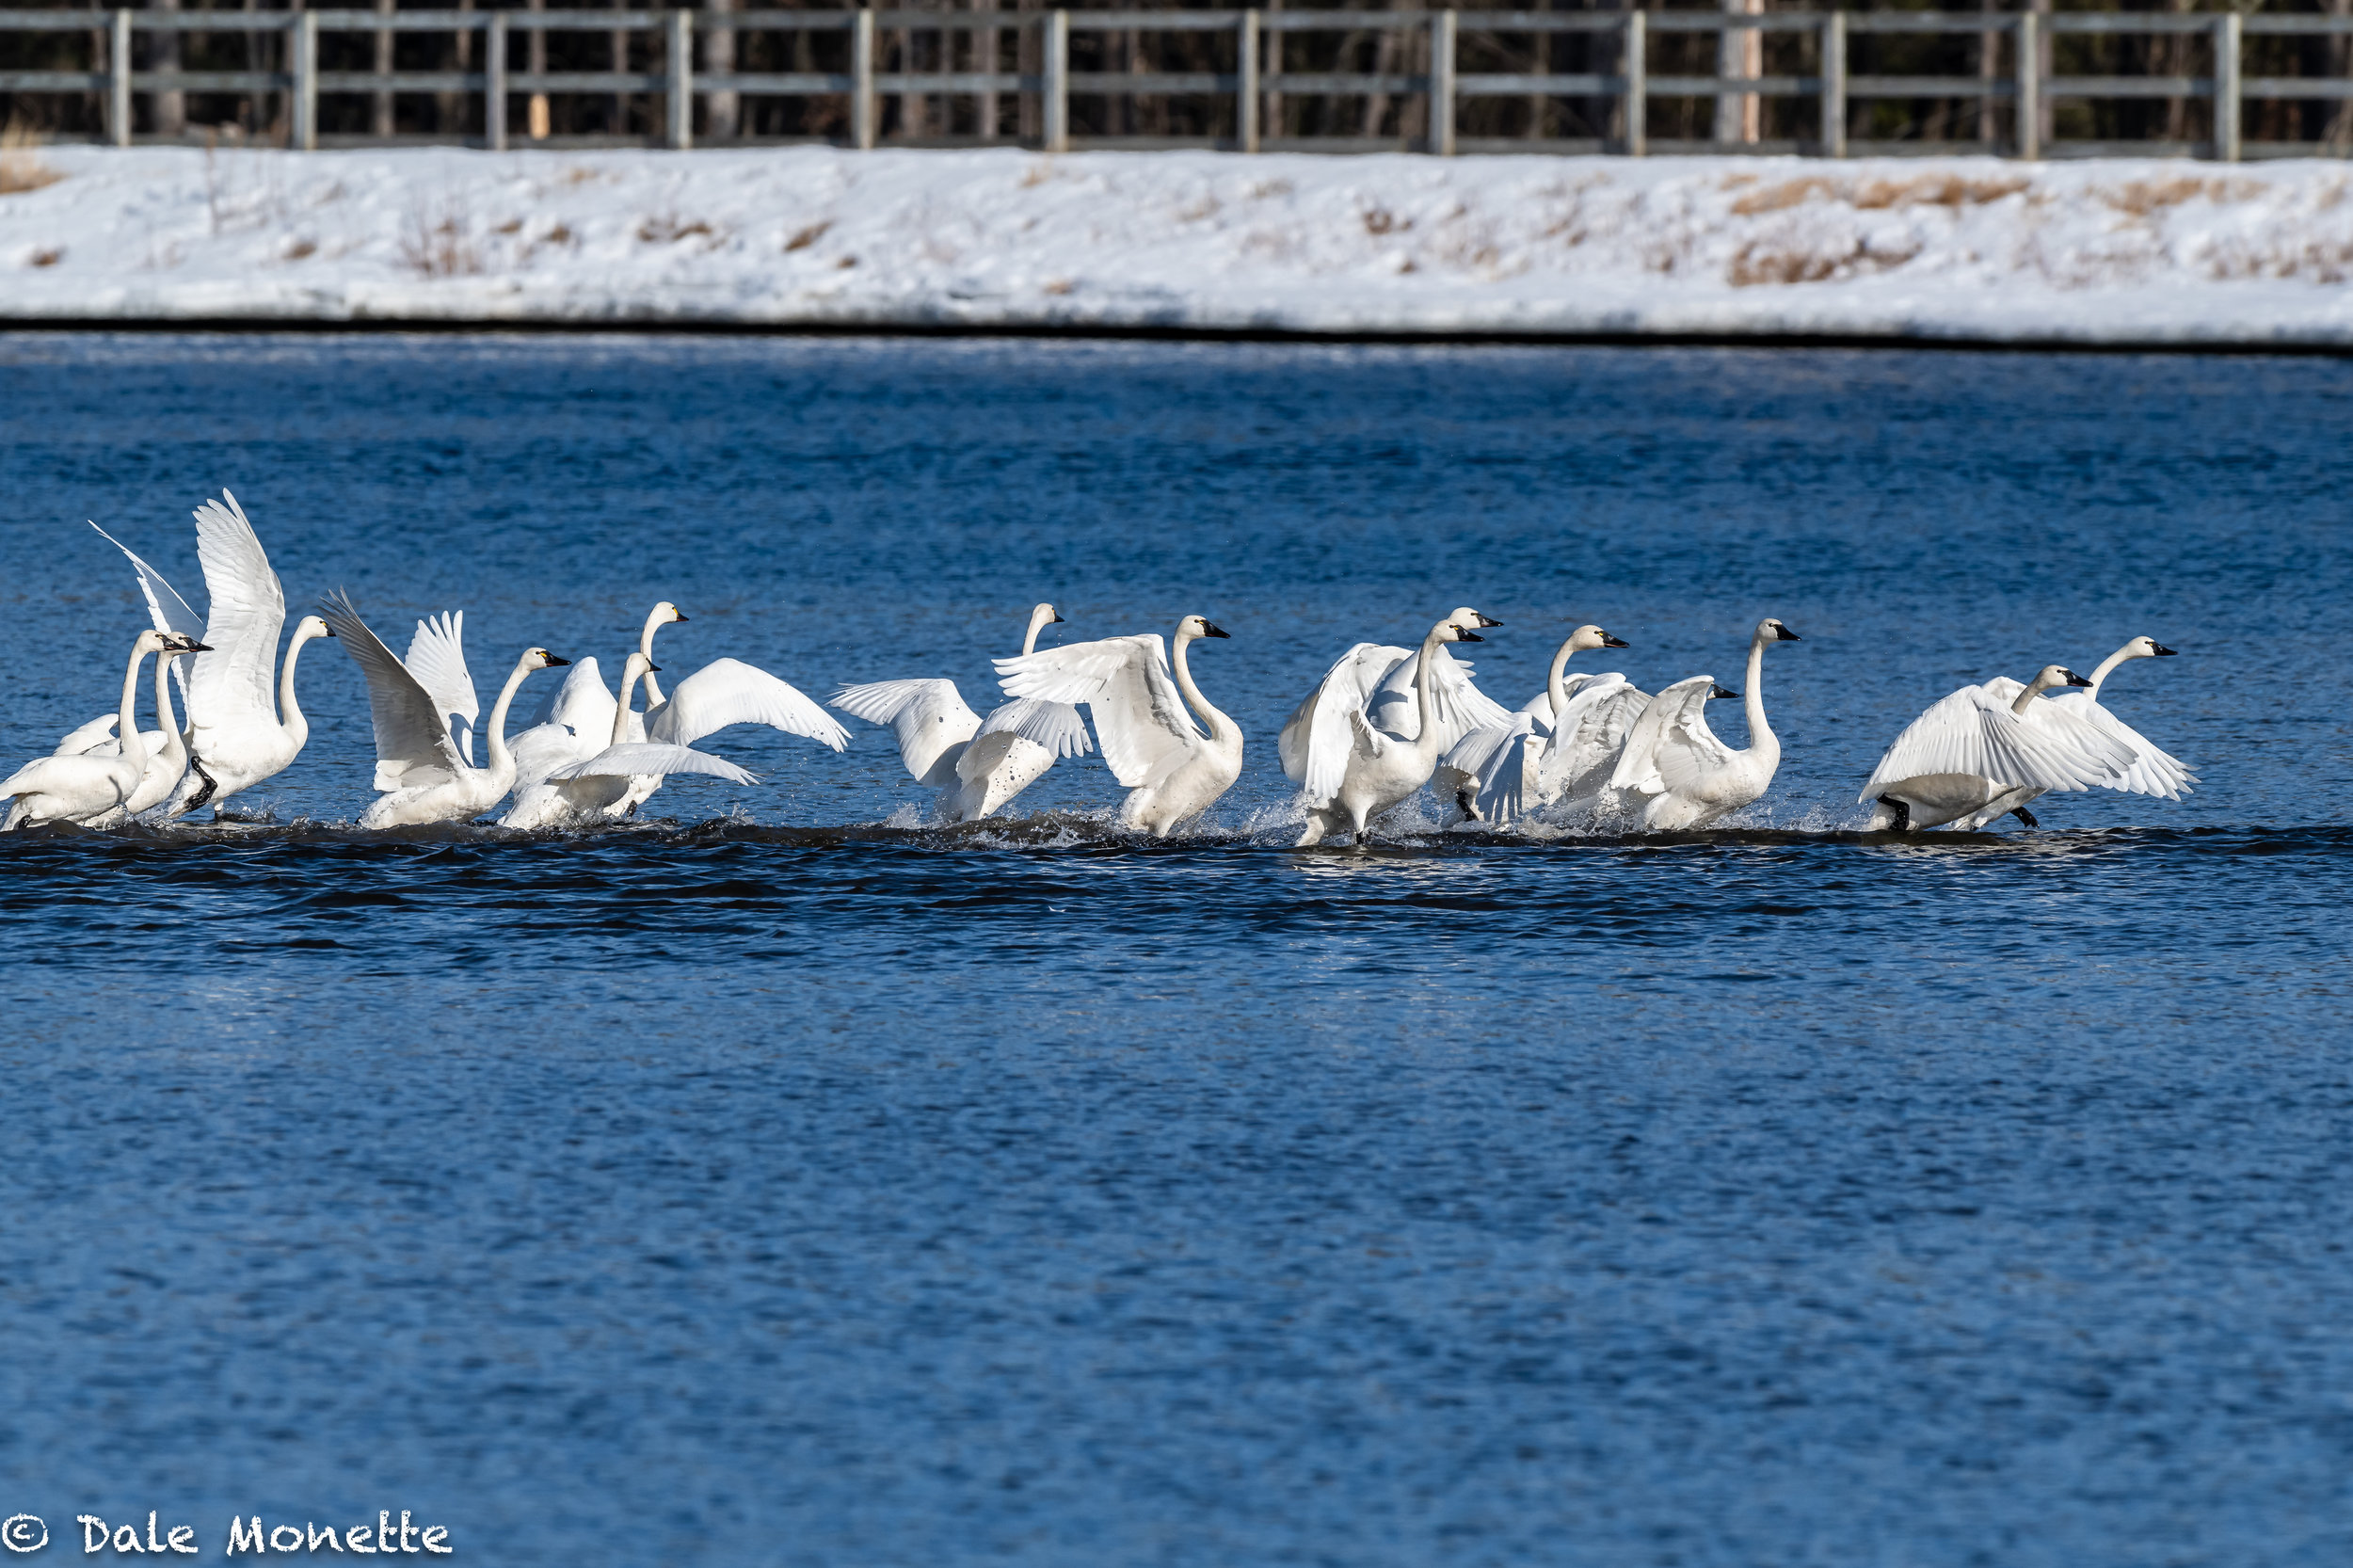   A rare sight any day in MA would be one tundra swan,  but this week a flock of 19 are hanging out along the CT. River in Turners Falls.  The swans are rarely seen in MA.  